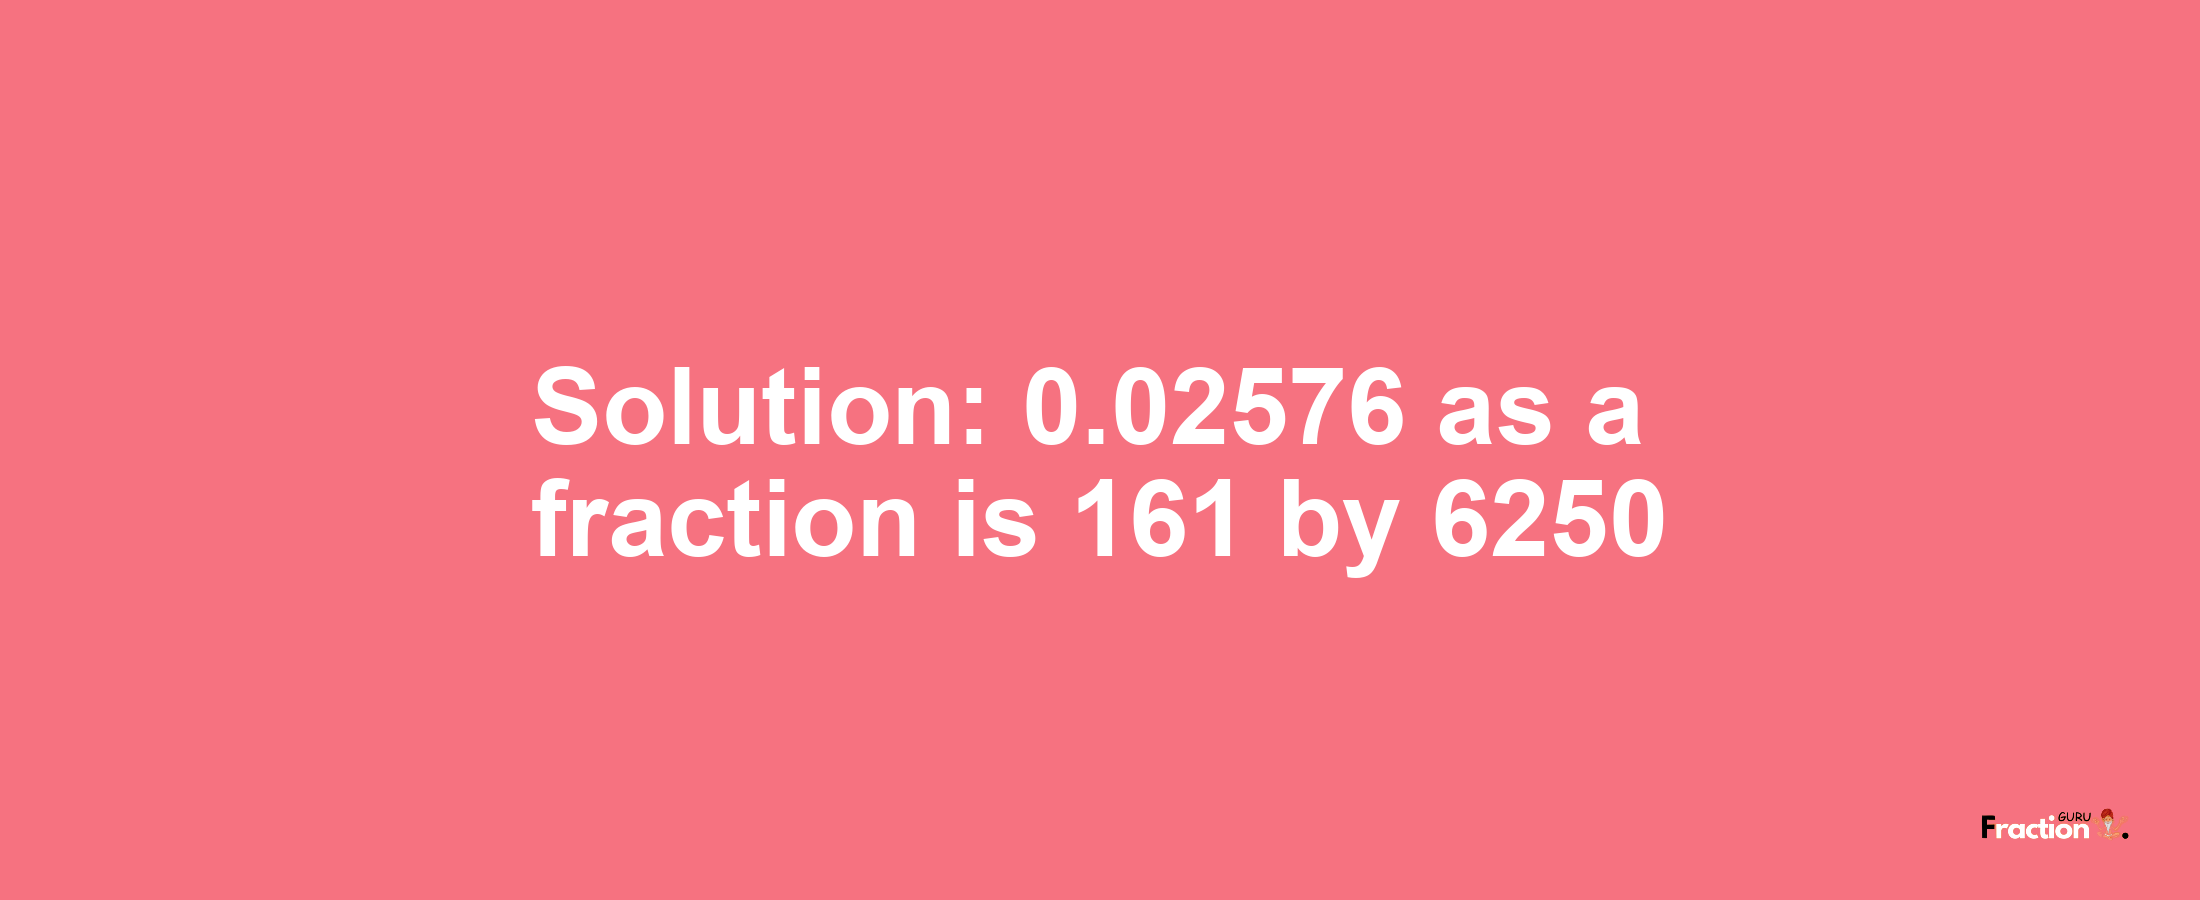 Solution:0.02576 as a fraction is 161/6250